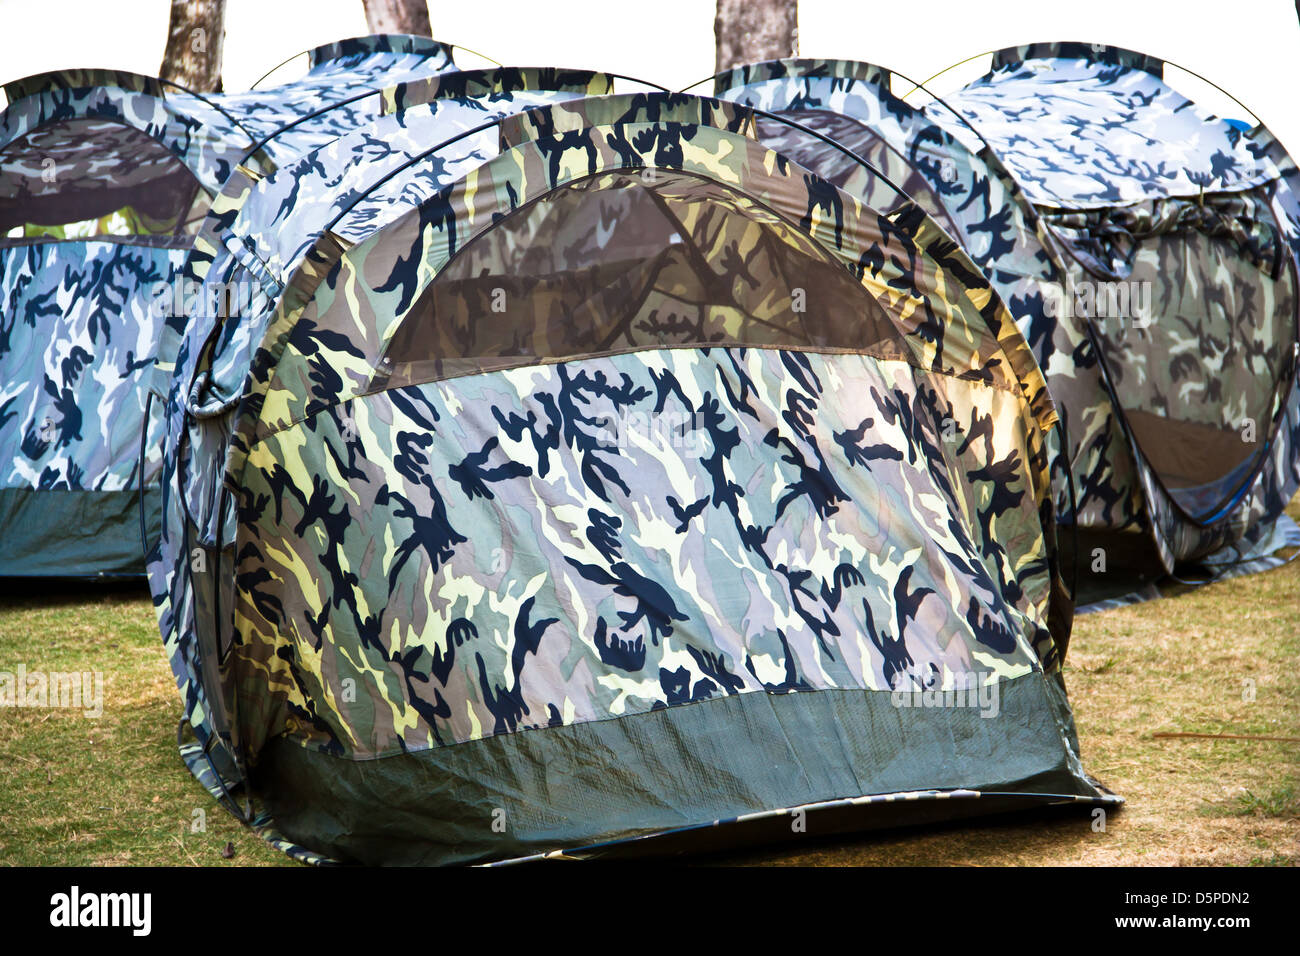 https://c8.alamy.com/comp/D5PDN2/a-small-canvas-tent-military-pattern-is-placed-on-the-lawn-at-the-D5PDN2.jpg